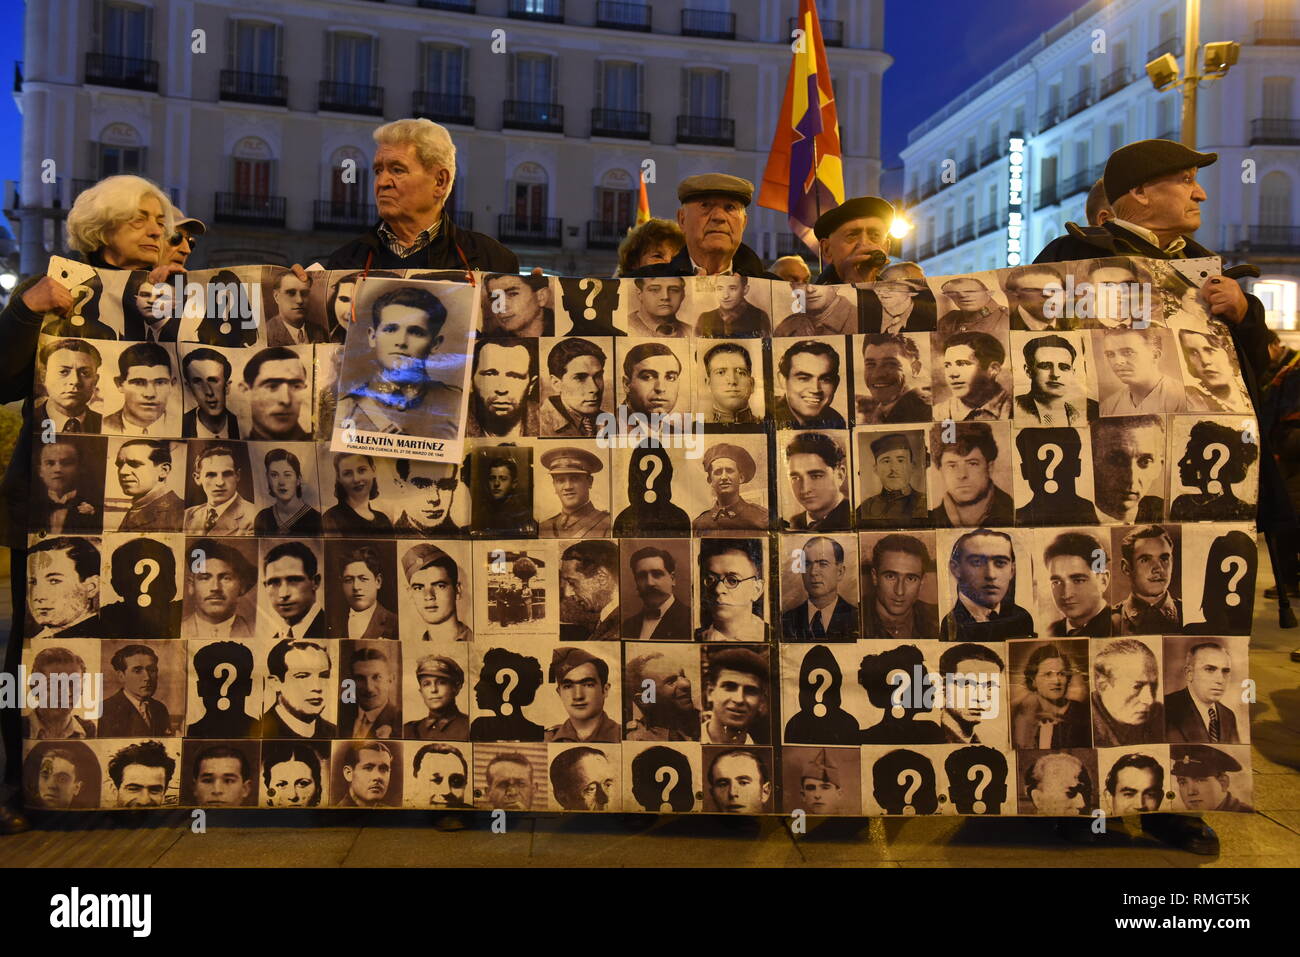 Protesters are seen holding a banner with pictures of missing people during the Spanish dictatorship of Francisco Franco (1936-1975), as they take part during the protest. Around hundred people gathered in Madrid to protest against immunity for the crimes committed during the Spanish Civil War, the Francisco Franco's dictatorship, and to demand justice for victims and relatives. Stock Photo